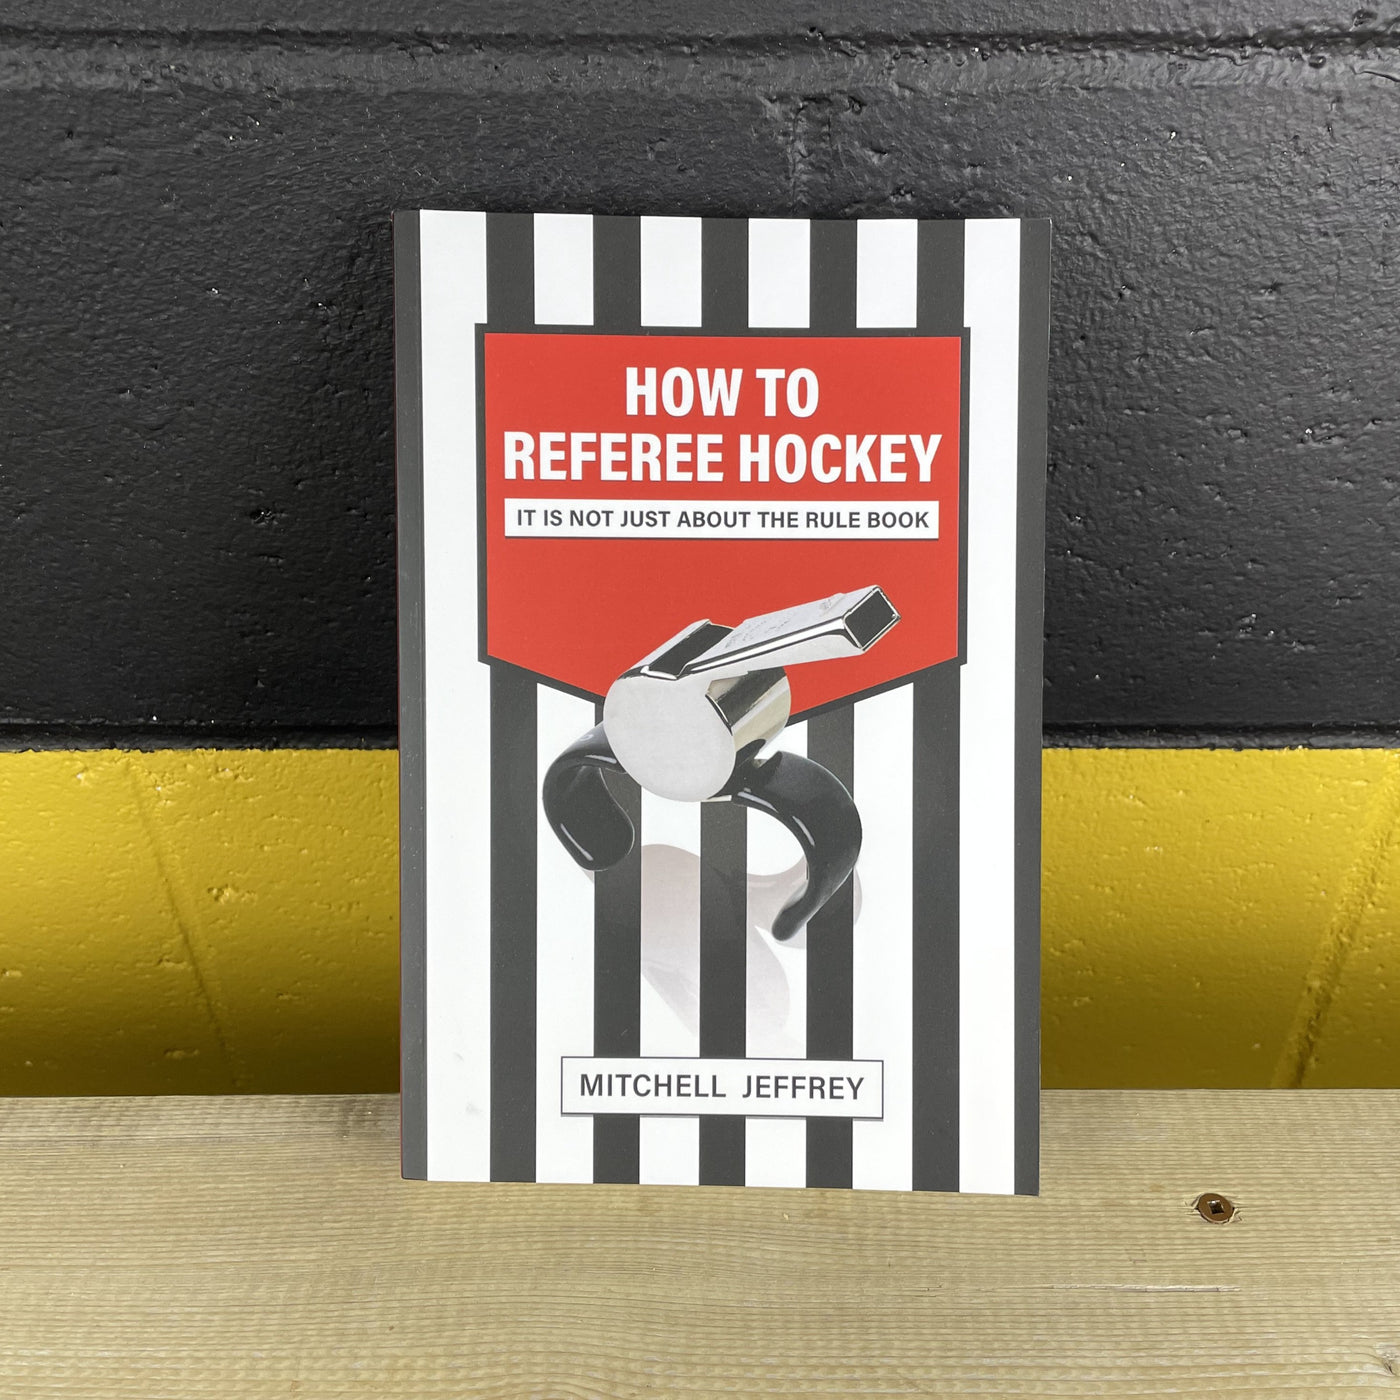 the book - How to referee hockey by Mitchell Jeffrey, front page